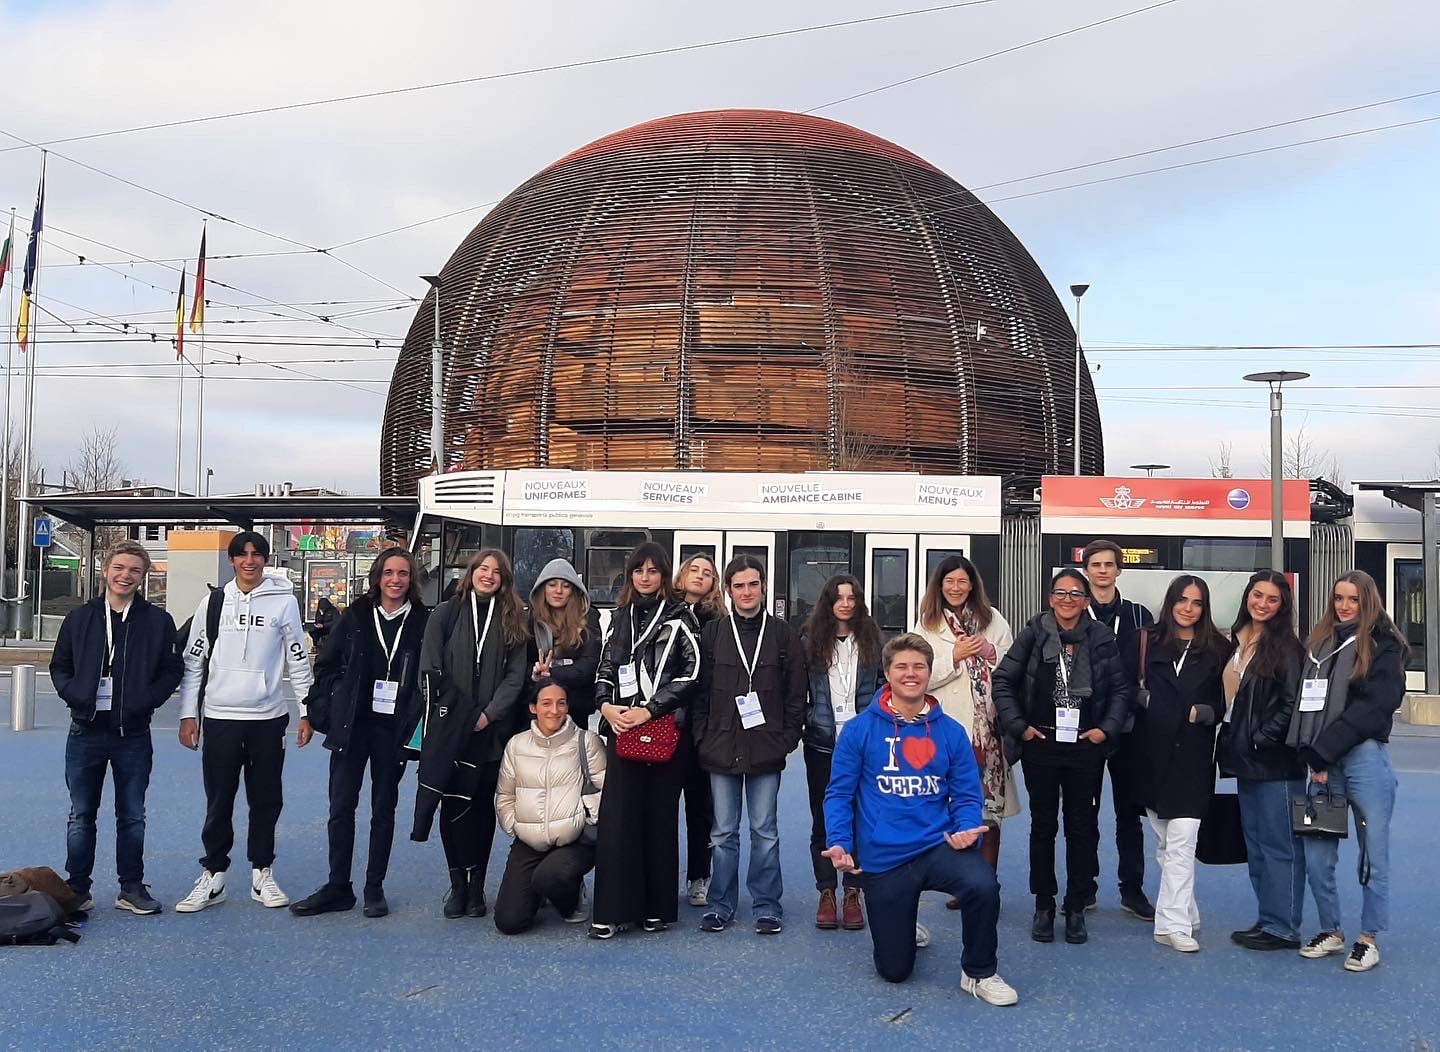 Secondary students visit CERN Image